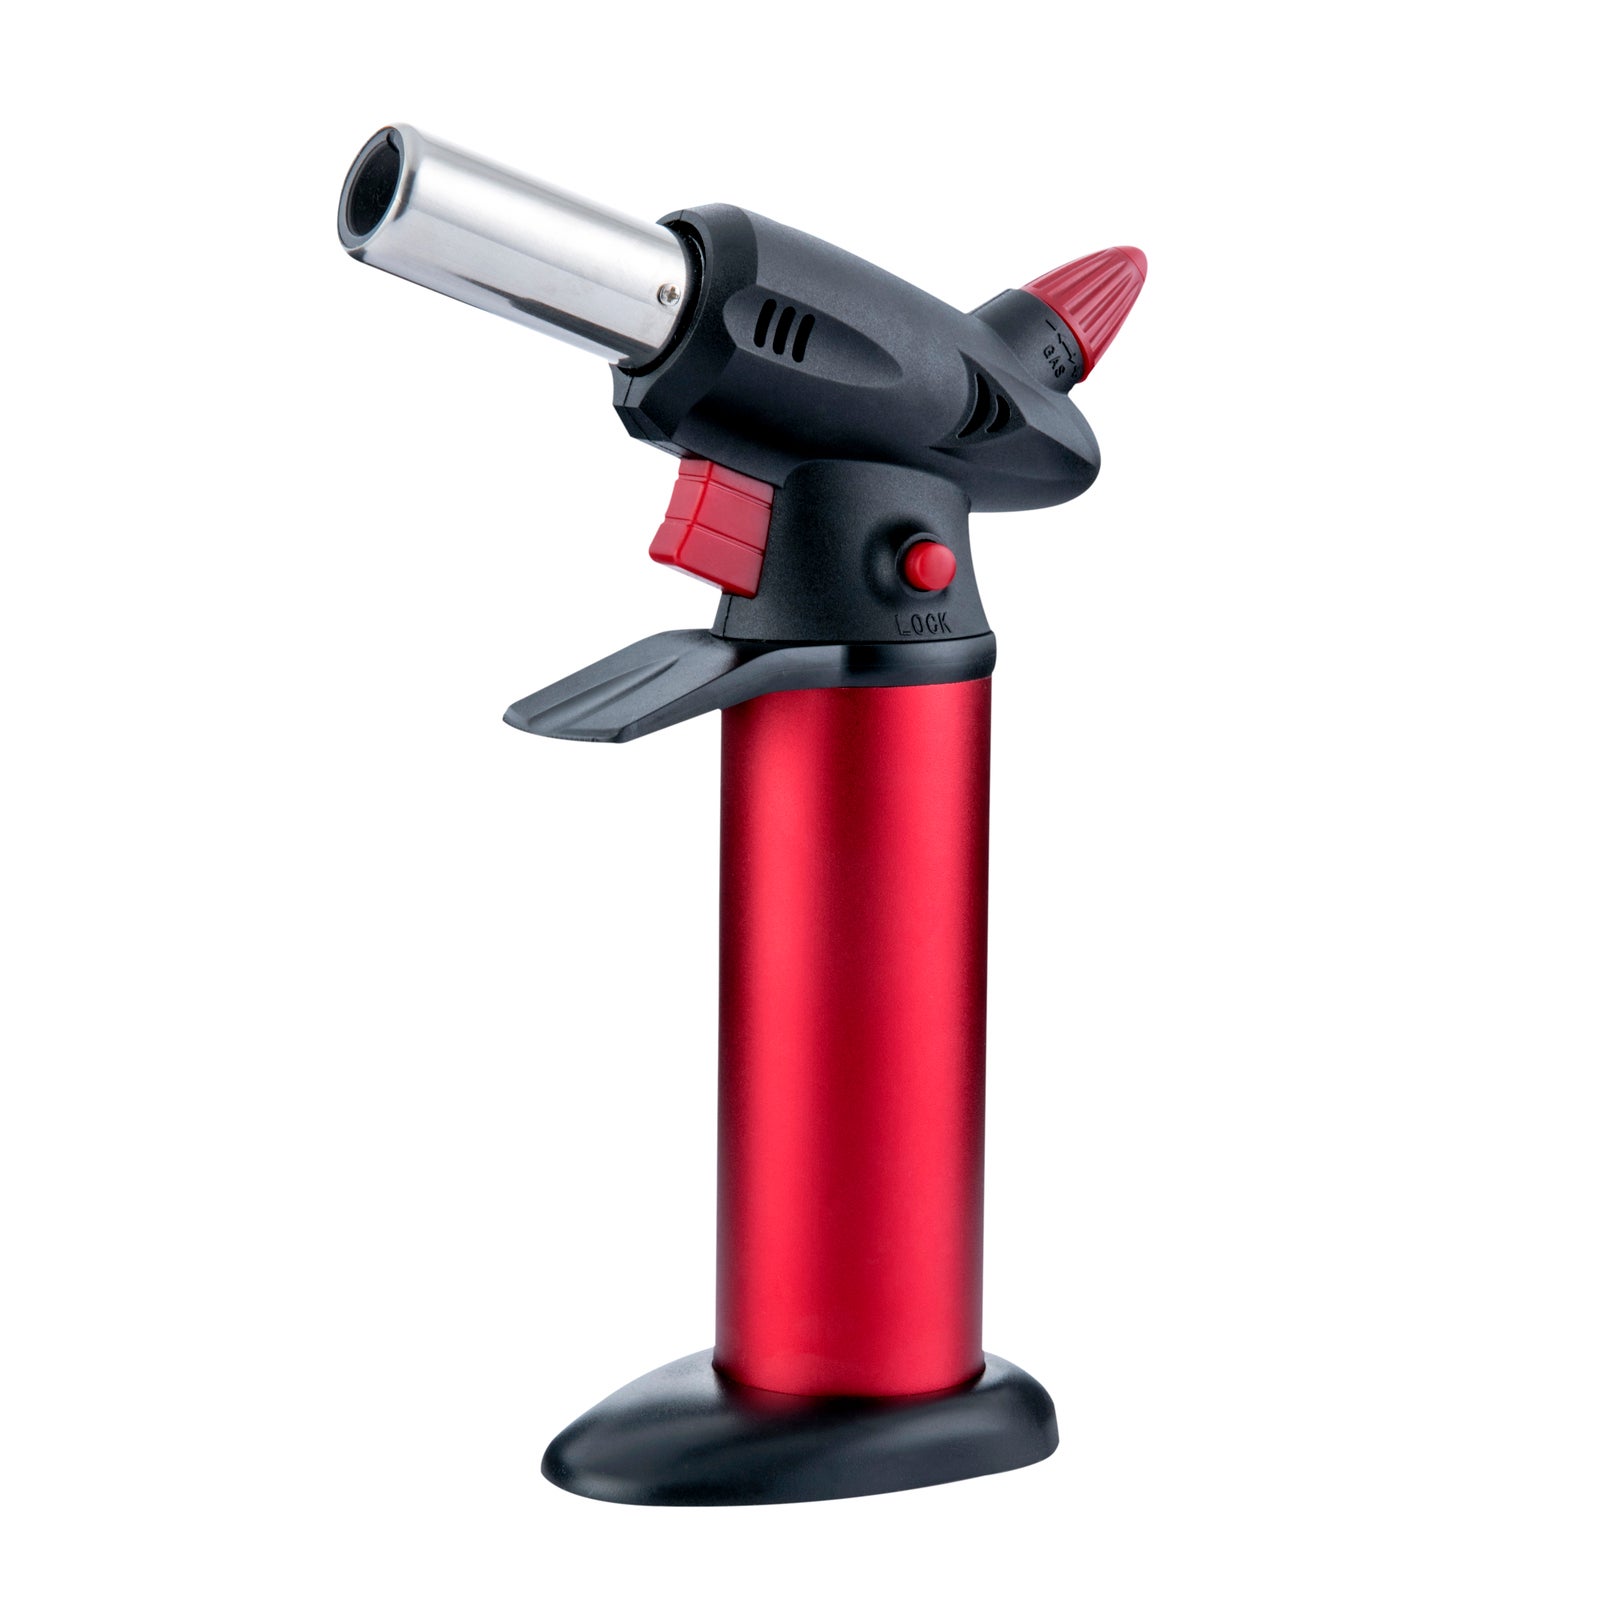 Gourmet Kitchen Refillable Butane Kitchen Blow Torch - Red And Black